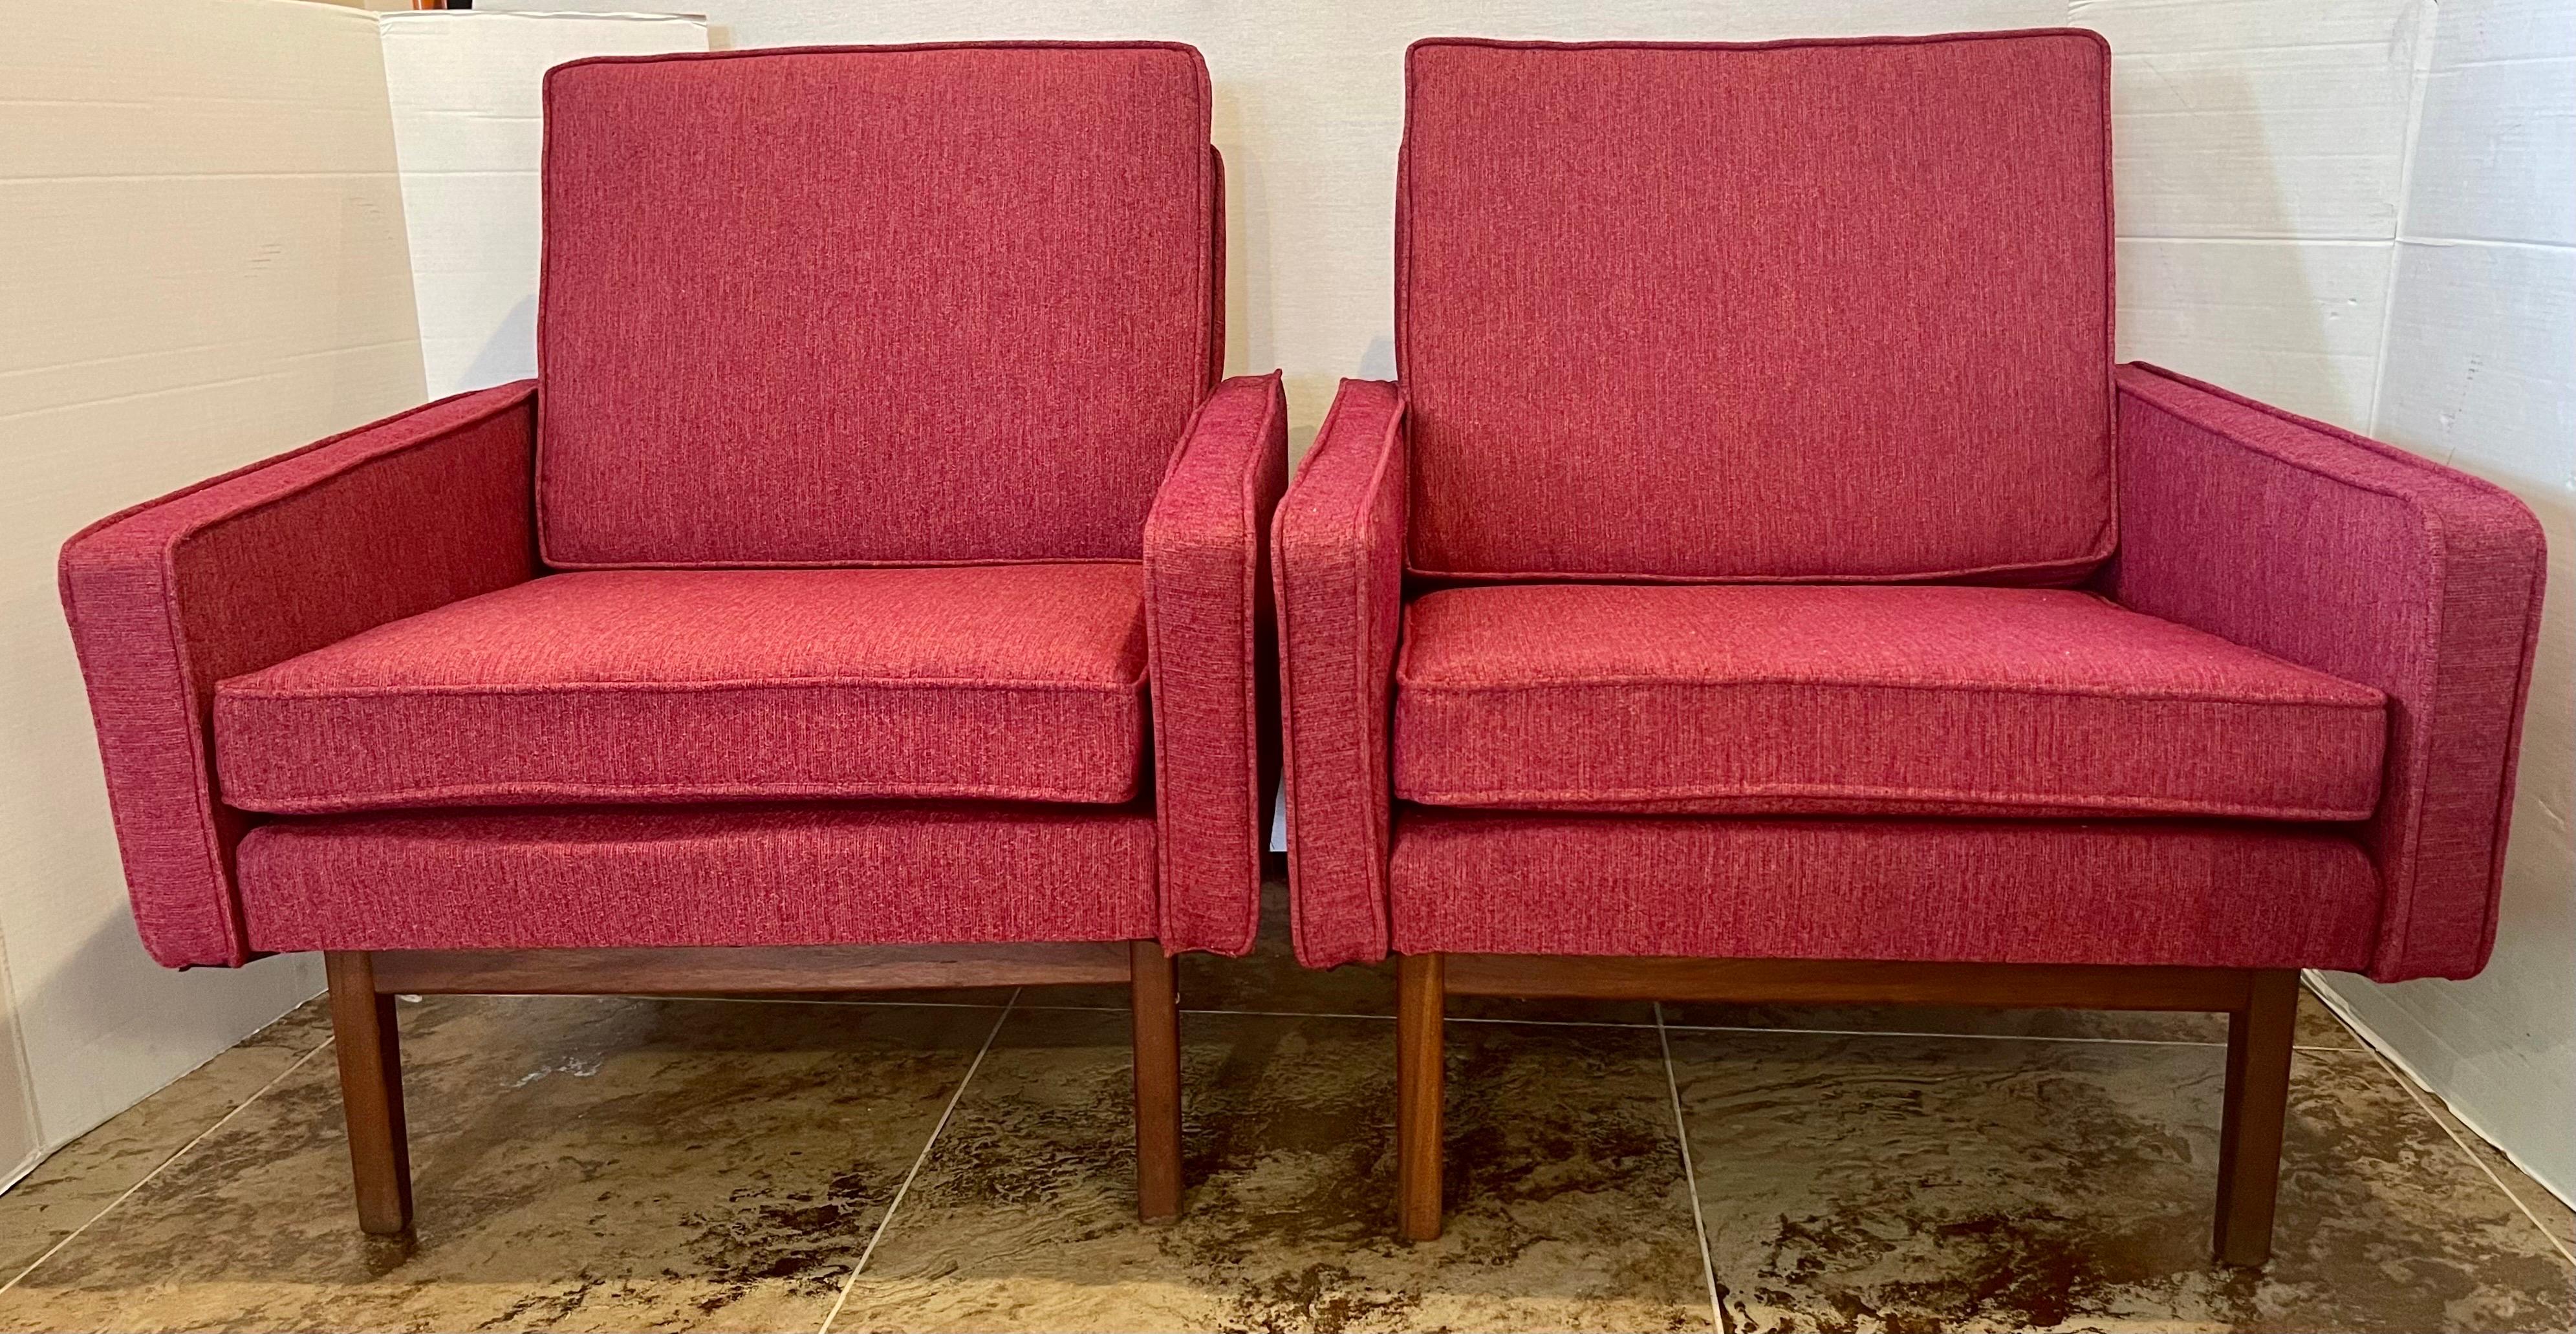 Mid-Century Modern Pair of Matching Jack Cartwright for Founders Lounge Chairs Newly Upholstered